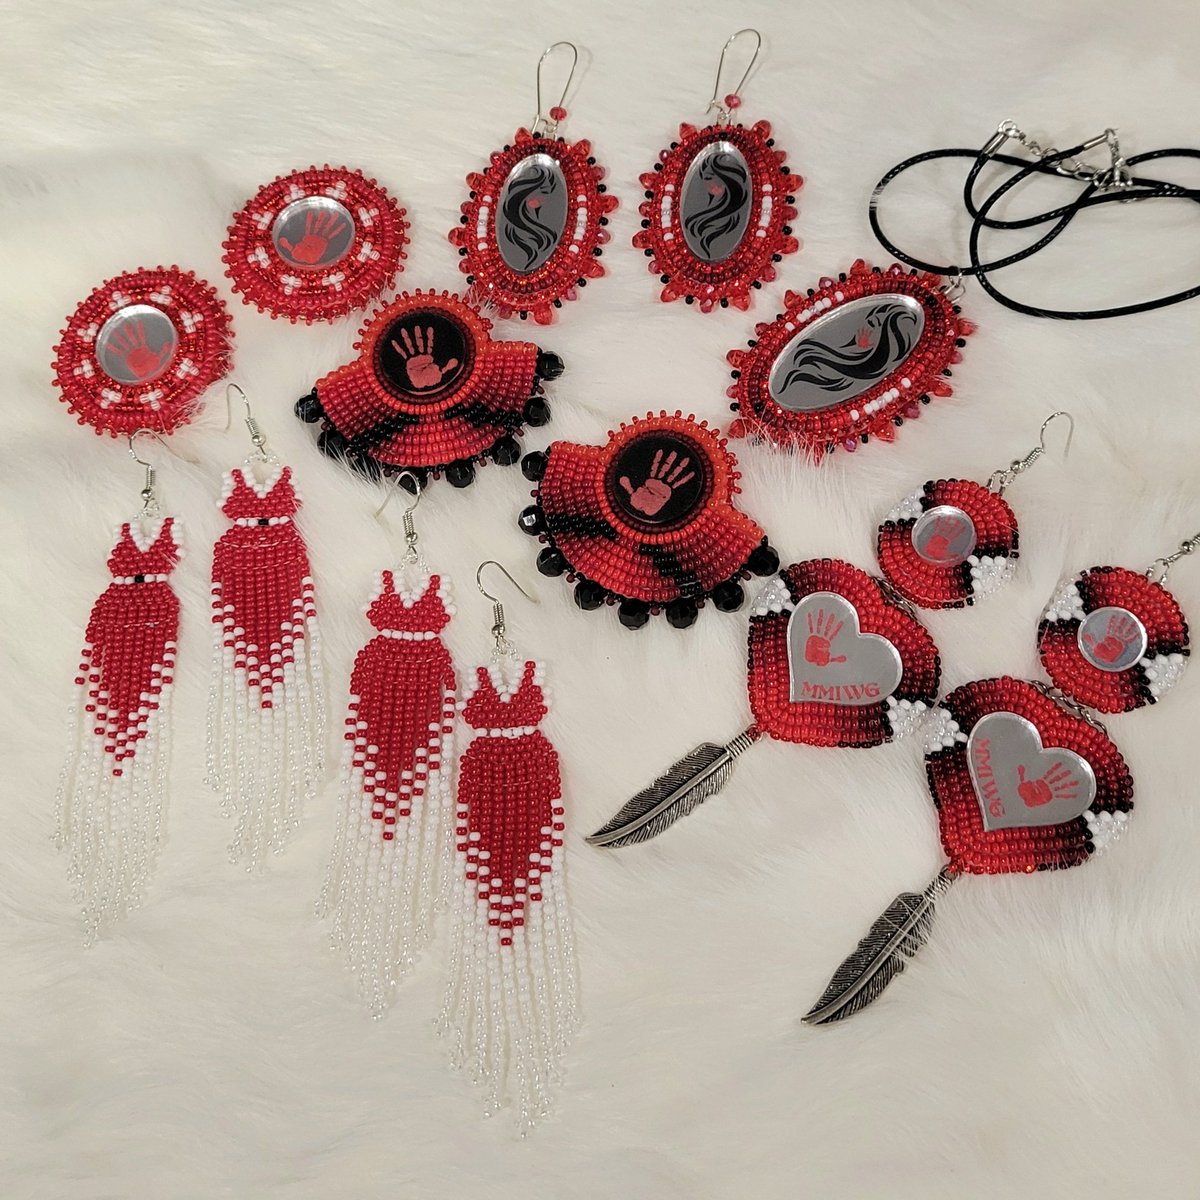 The MMIW fundraiser collection is available now! 20% of every sale will be donated to the Native Women's Association of Canada ❤️ celdzinbeadwork.com